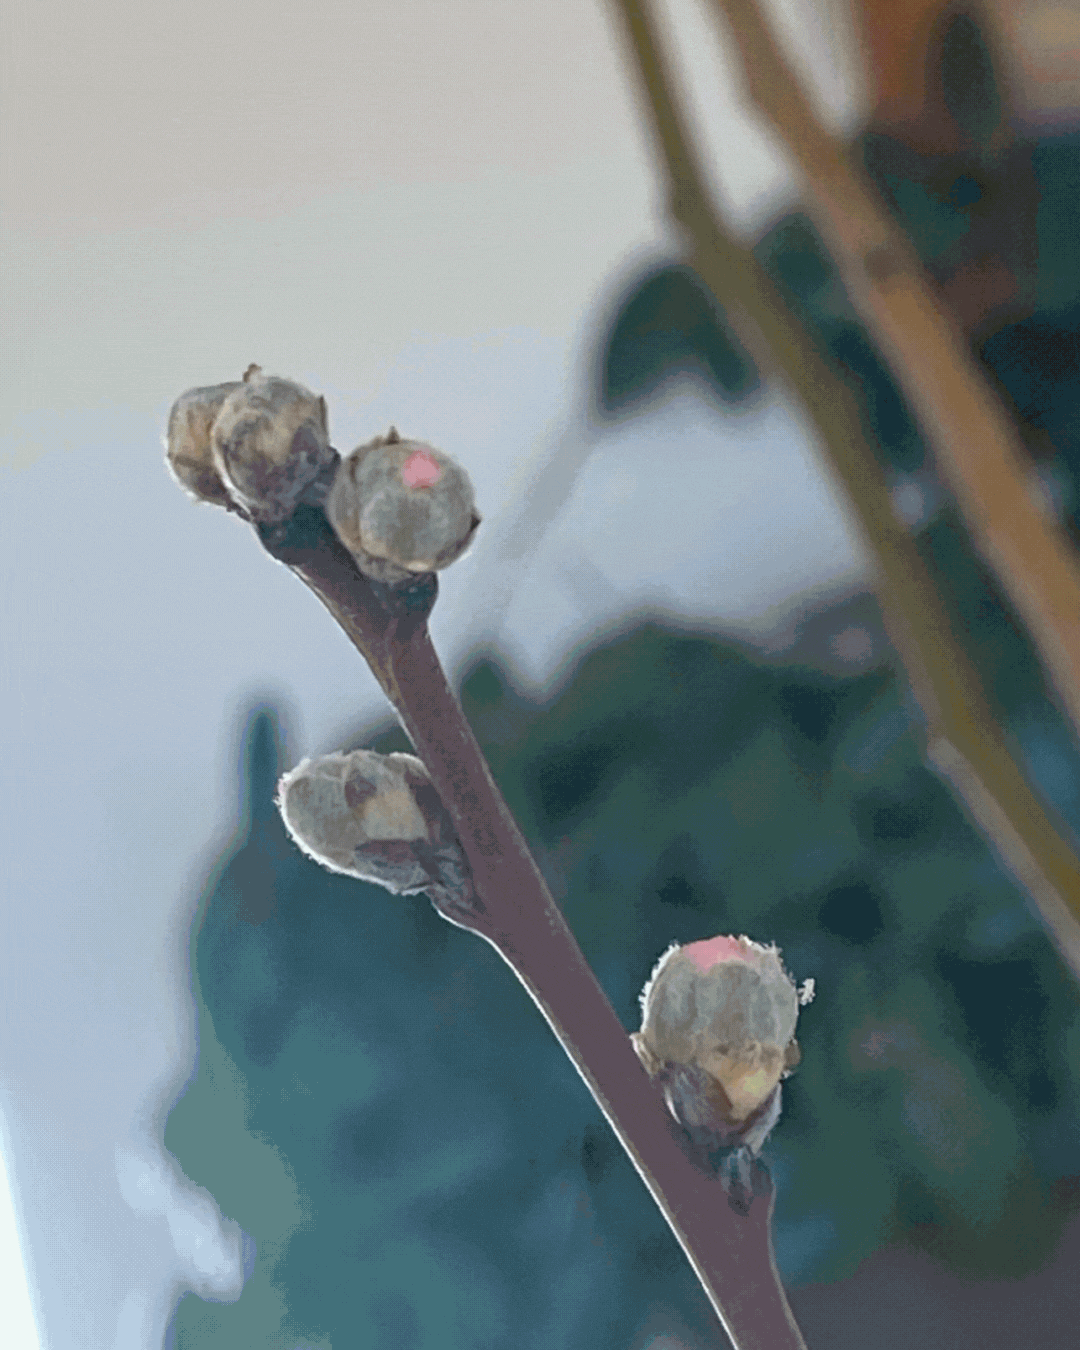 time lapse slide show of branches in vases and buds opening into pink blossoms